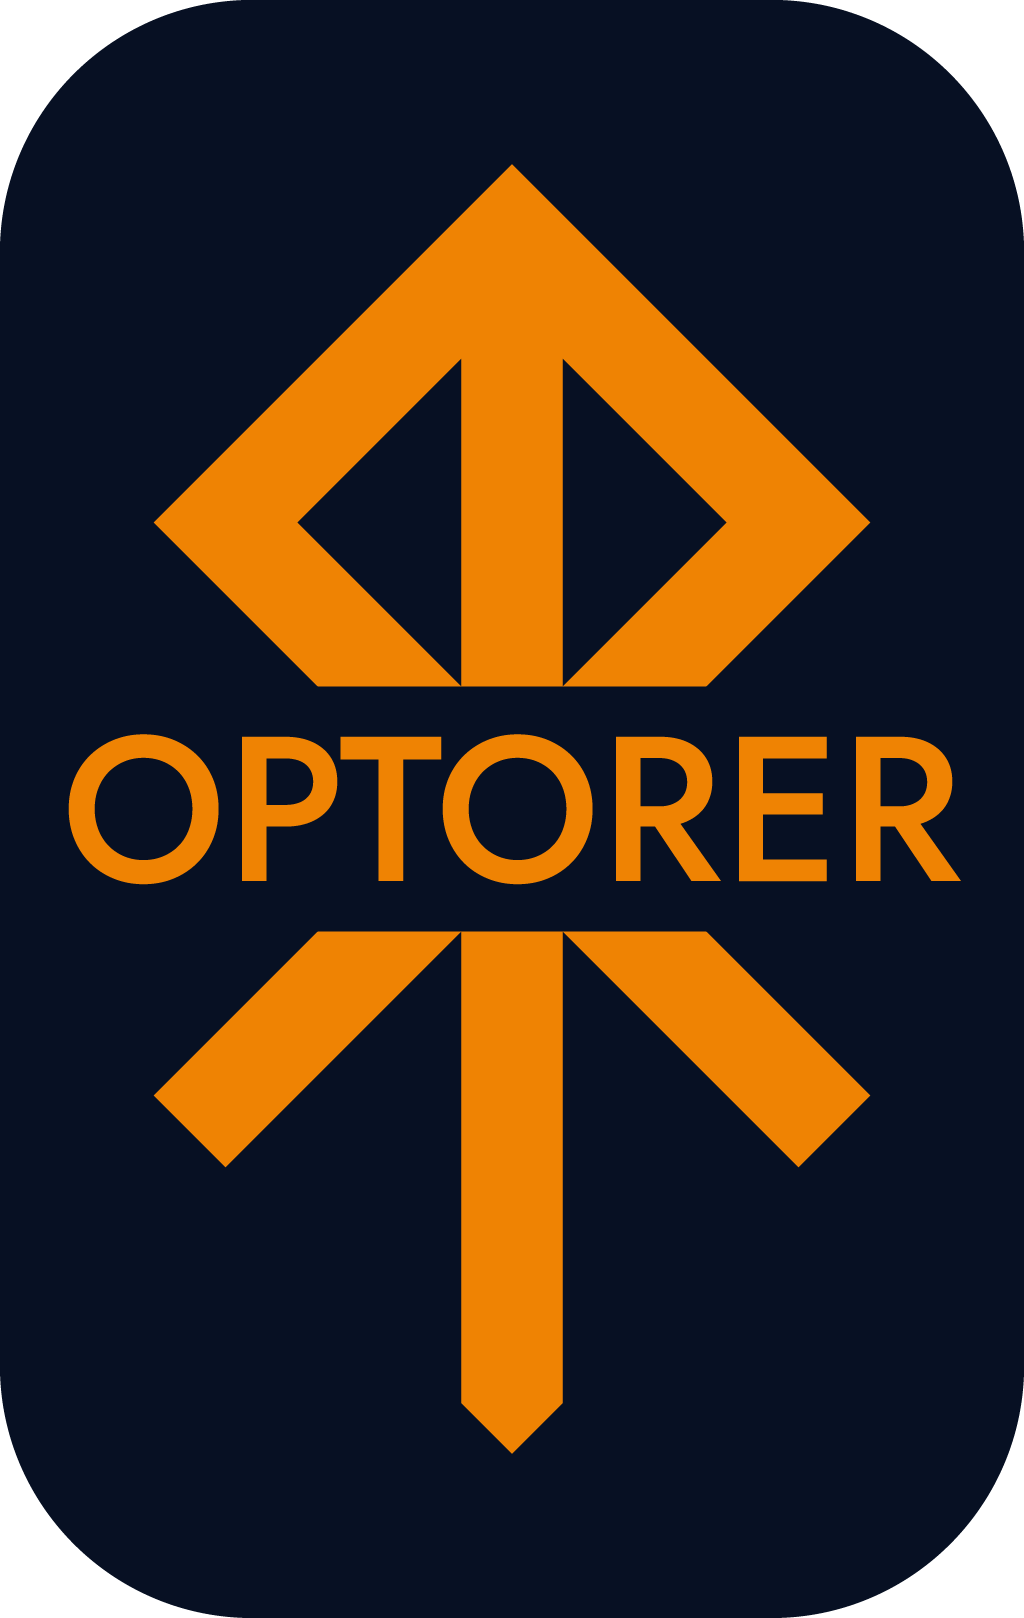 OPTORER PPE - Optimal routing and exploration of touristic and cultural areas of interest within Attica given personalized adaptive preferences, promoted underlying purpose and interactive experience.